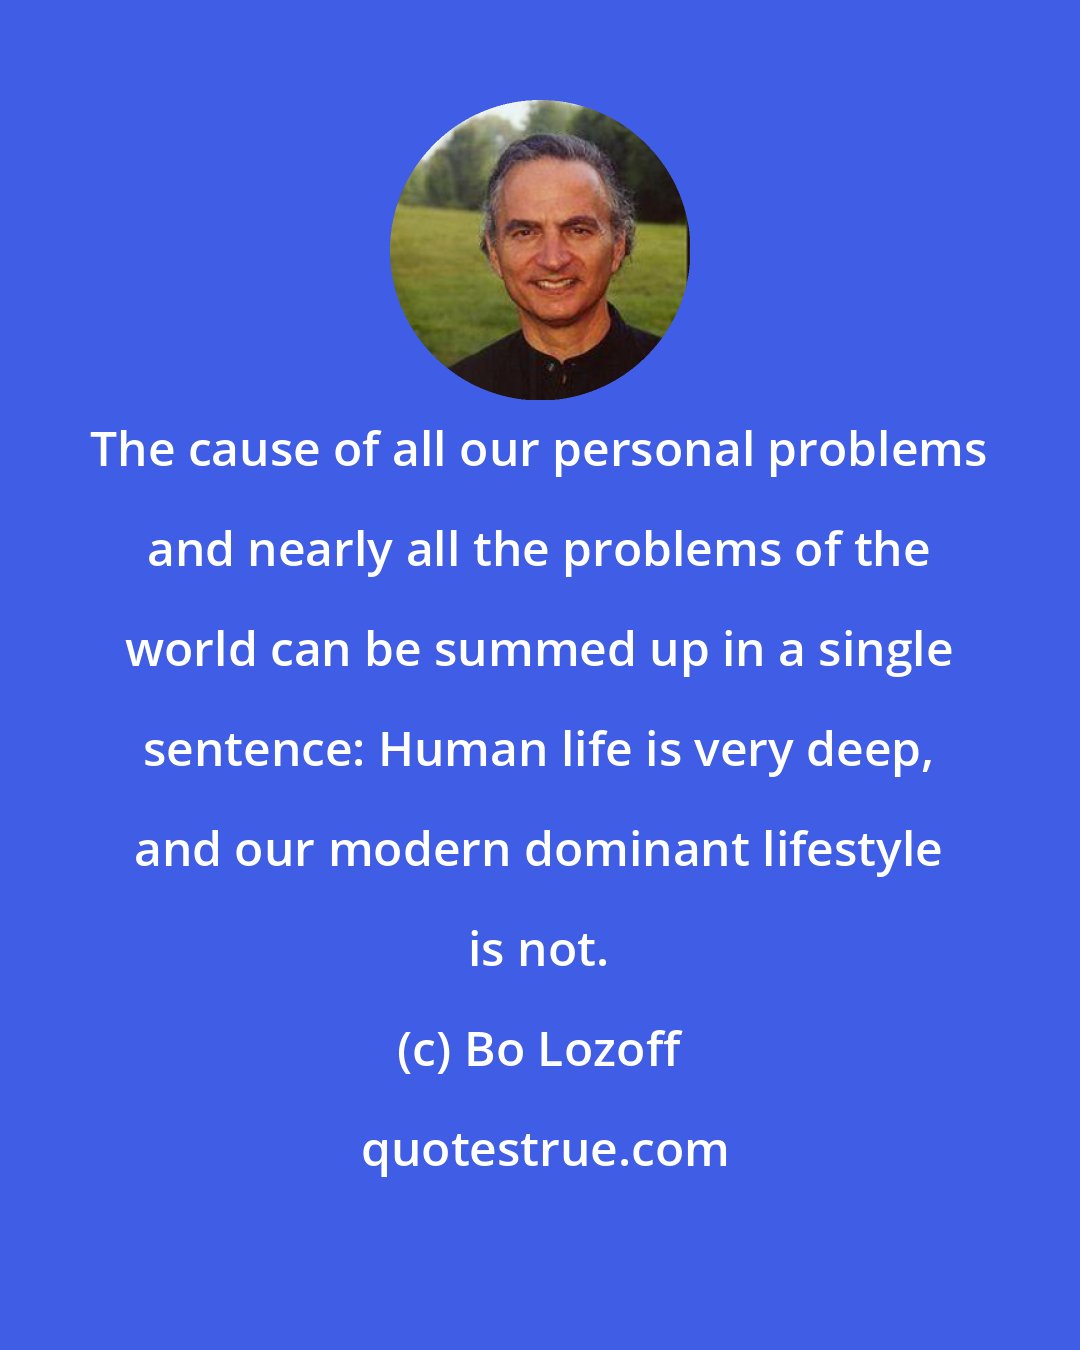 Bo Lozoff: The cause of all our personal problems and nearly all the problems of the world can be summed up in a single sentence: Human life is very deep, and our modern dominant lifestyle is not.